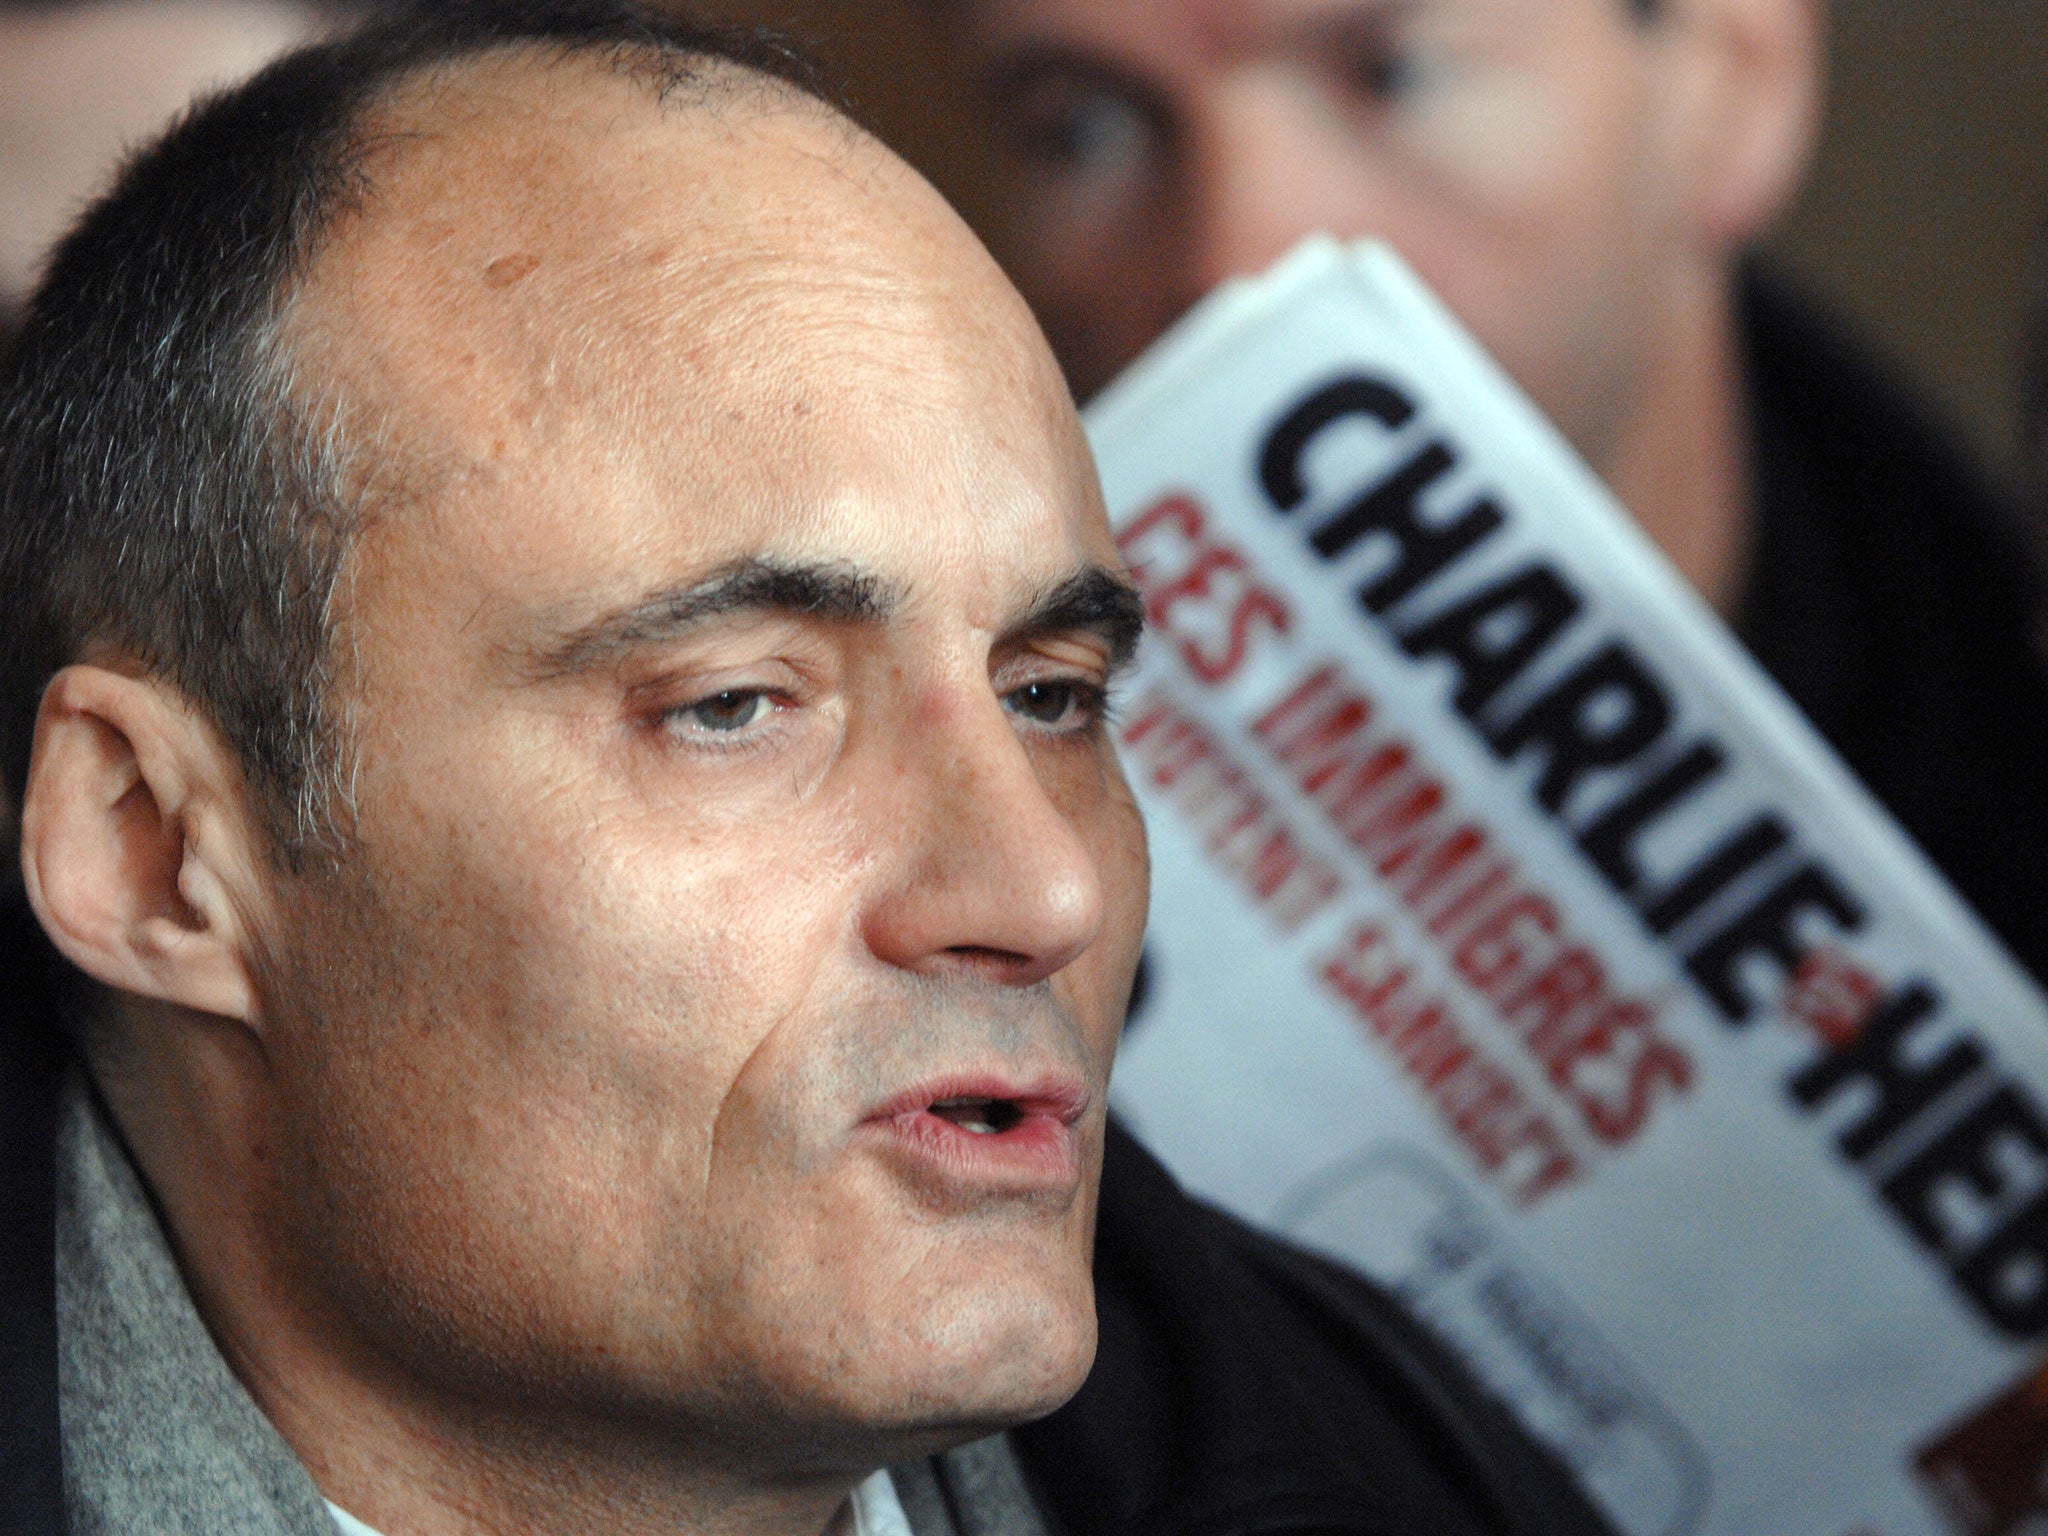 Philippe Val speaking to the press while chief editor of Charlie Hebdo in 2007